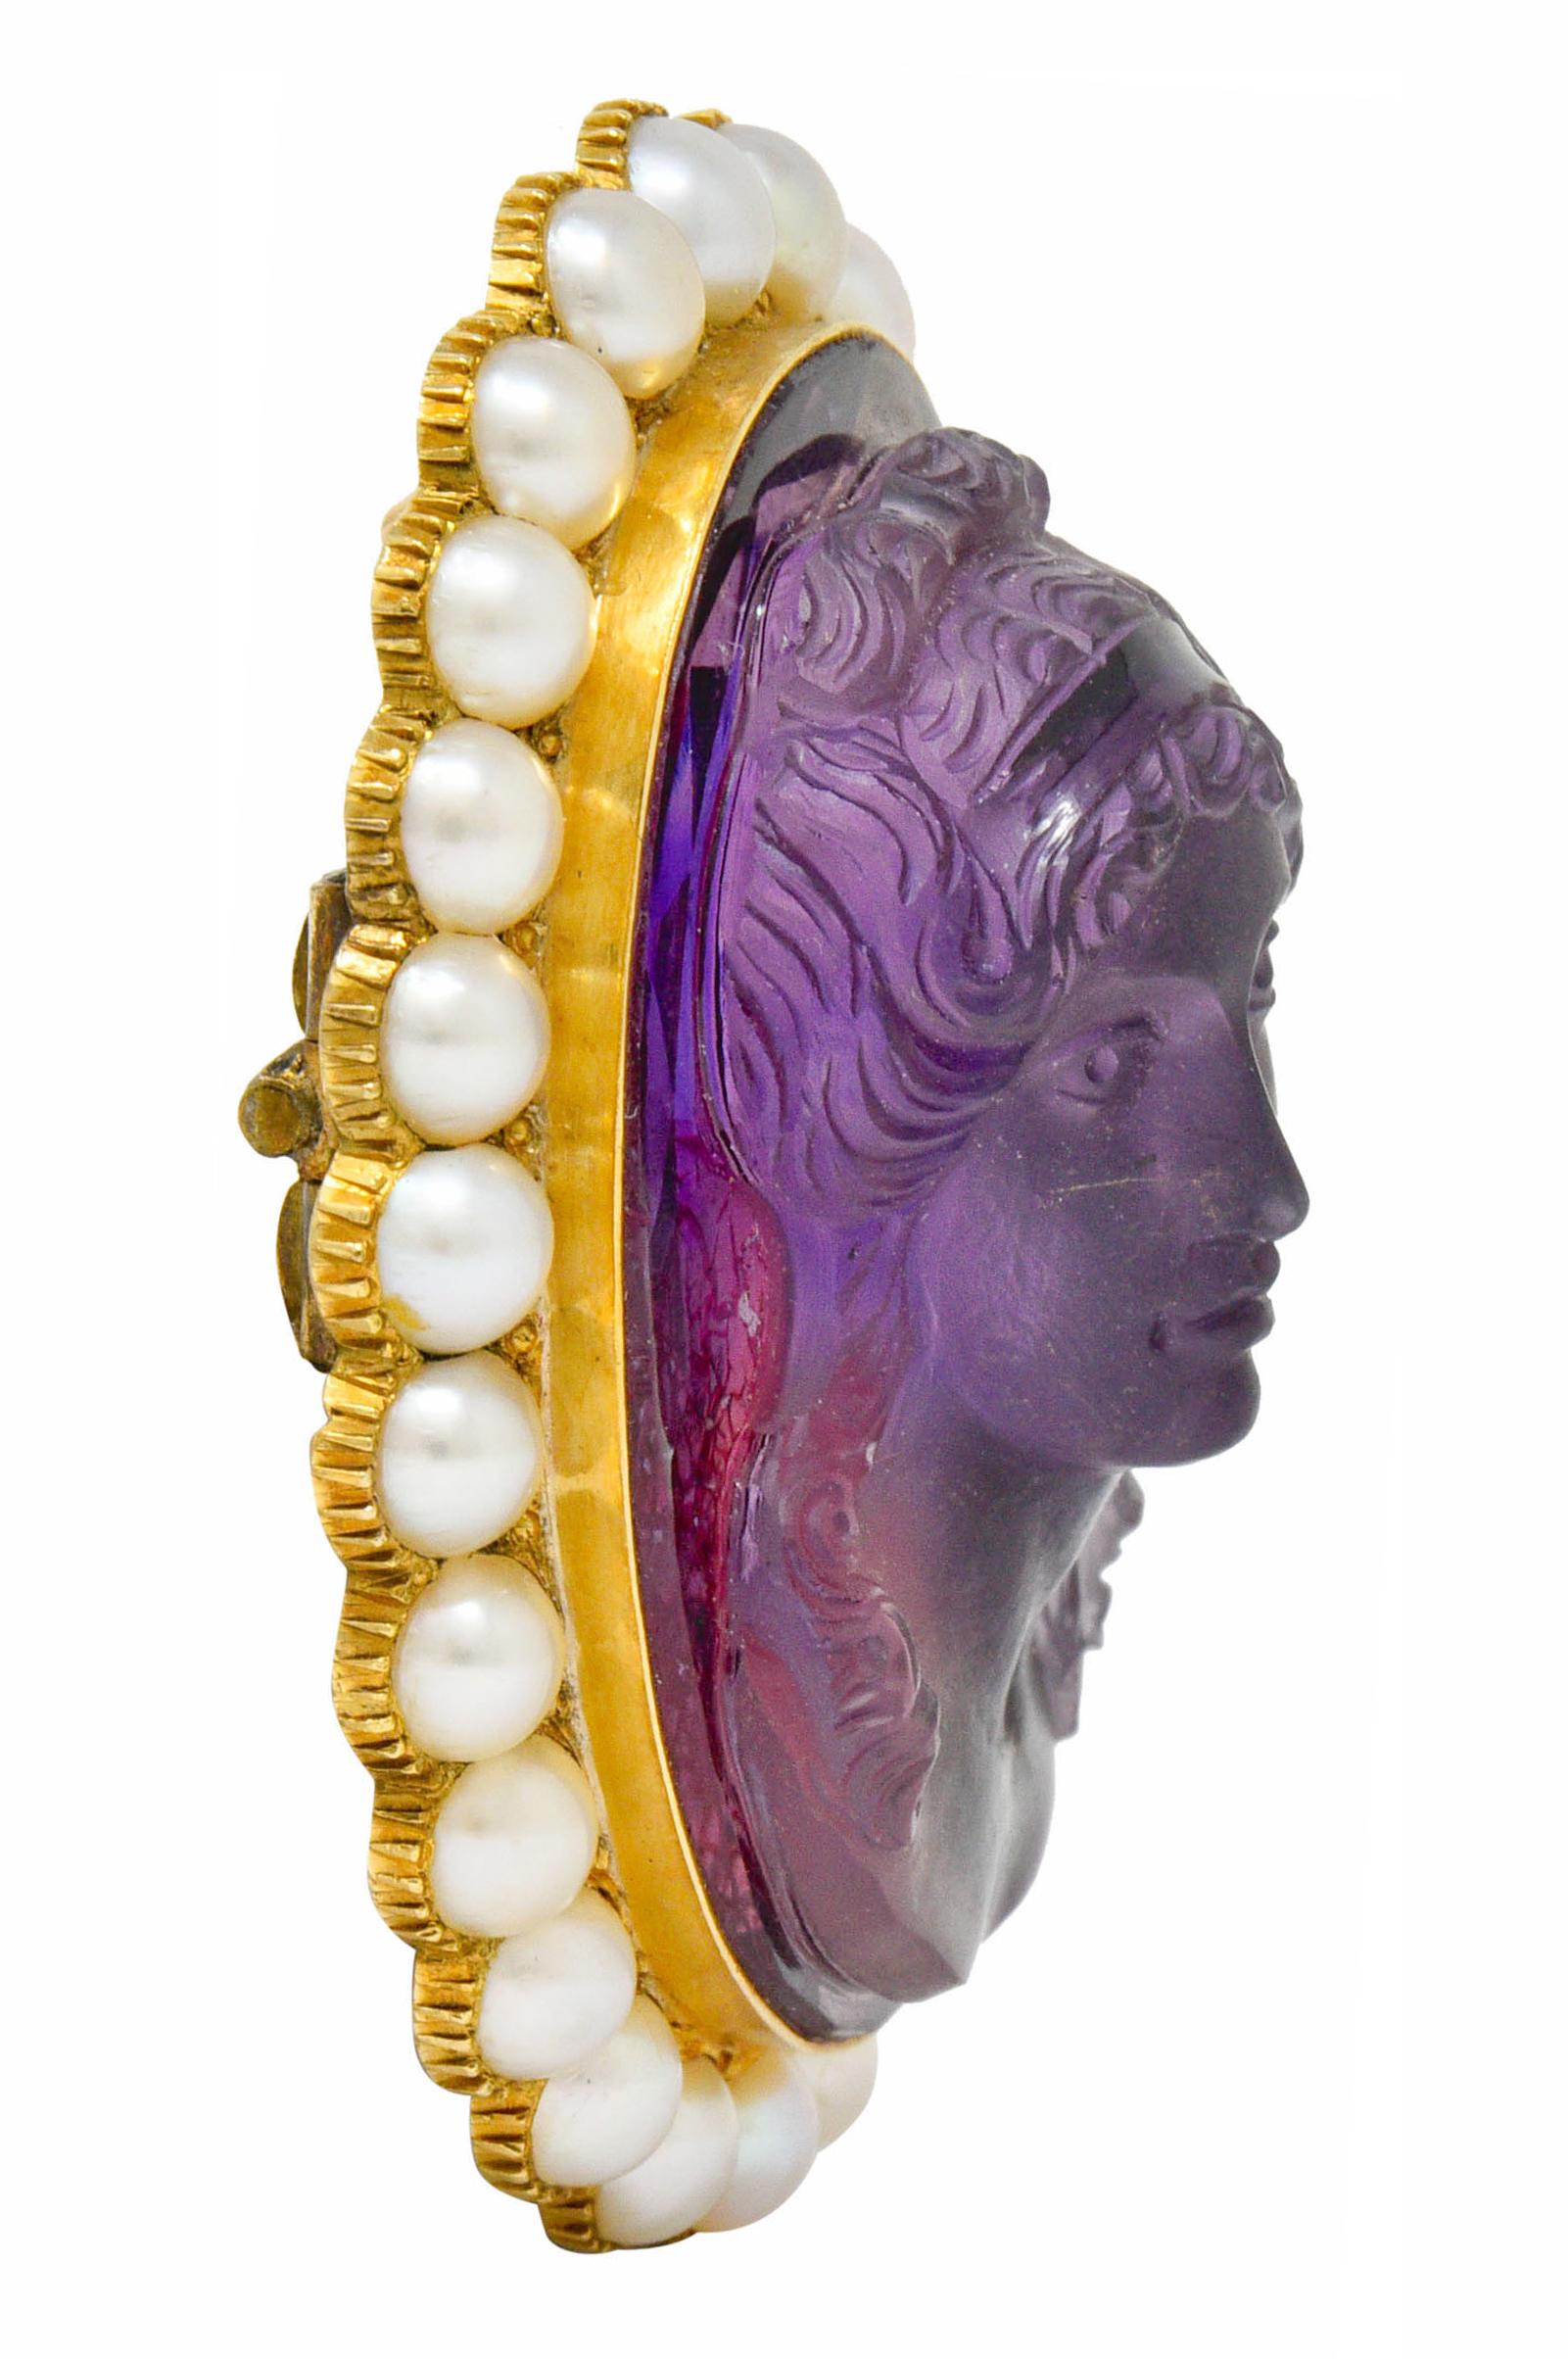 Centering an oval cut amethyst deeply carved to depict a front-facing woman with billowing hair

Transparent with a matte and gloss finish, deeply saturated purple in color

Surrounded by a halo of 3.5 mm pearls, very well matched cream in body